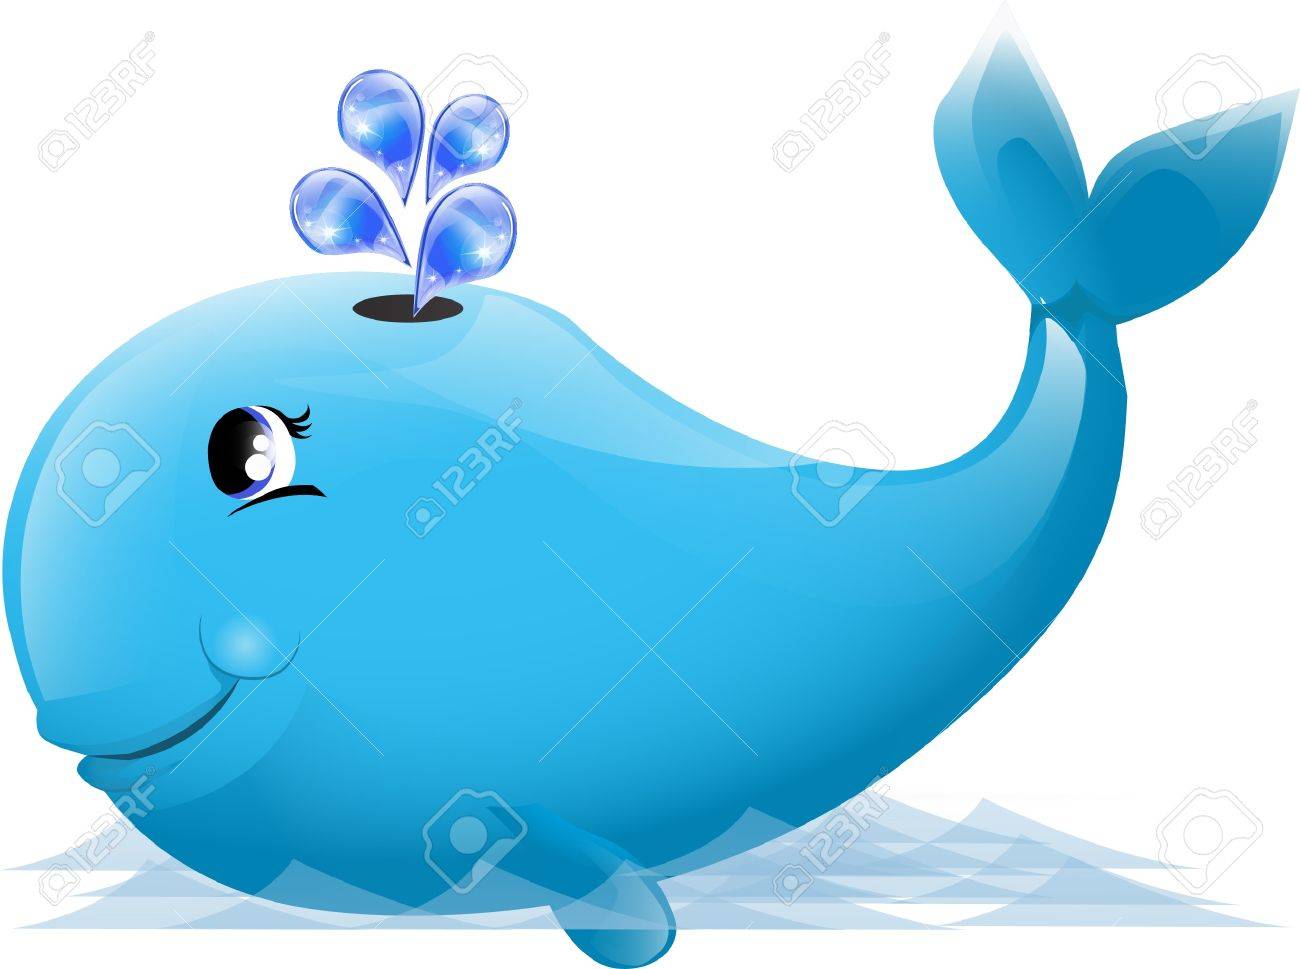 15702804-illustration-of-a-cute-whale.jpg